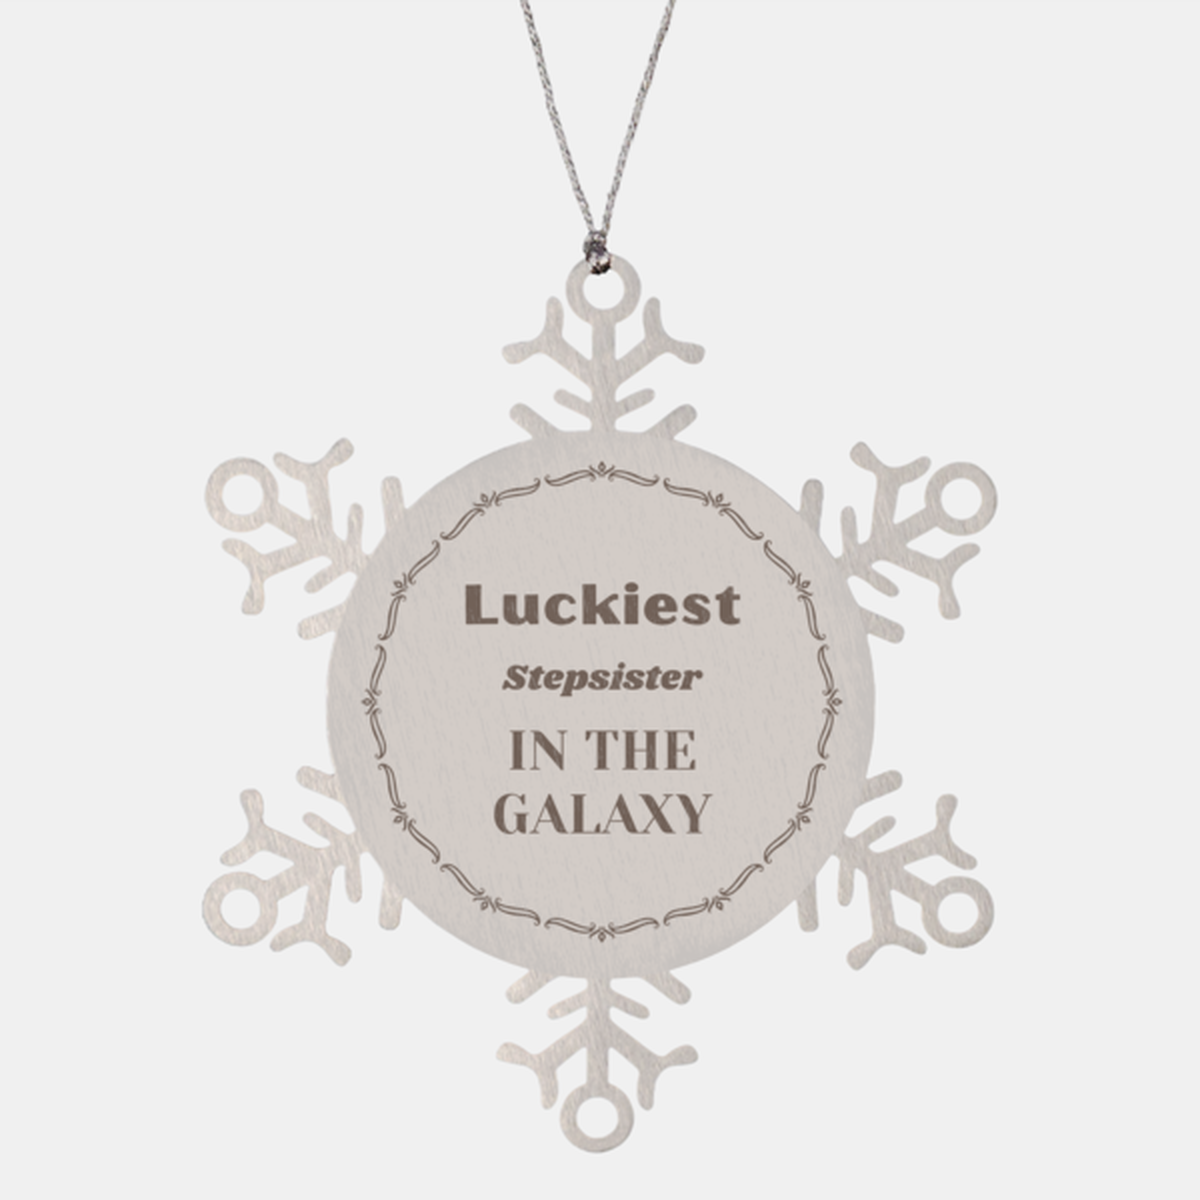 Luckiest Stepsister in the Galaxy, To My Stepsister Ornament Gifts, Christmas Stepsister Snowflake Ornament Gifts, X-mas Decorations Unique Gifts For Stepsister Men Women